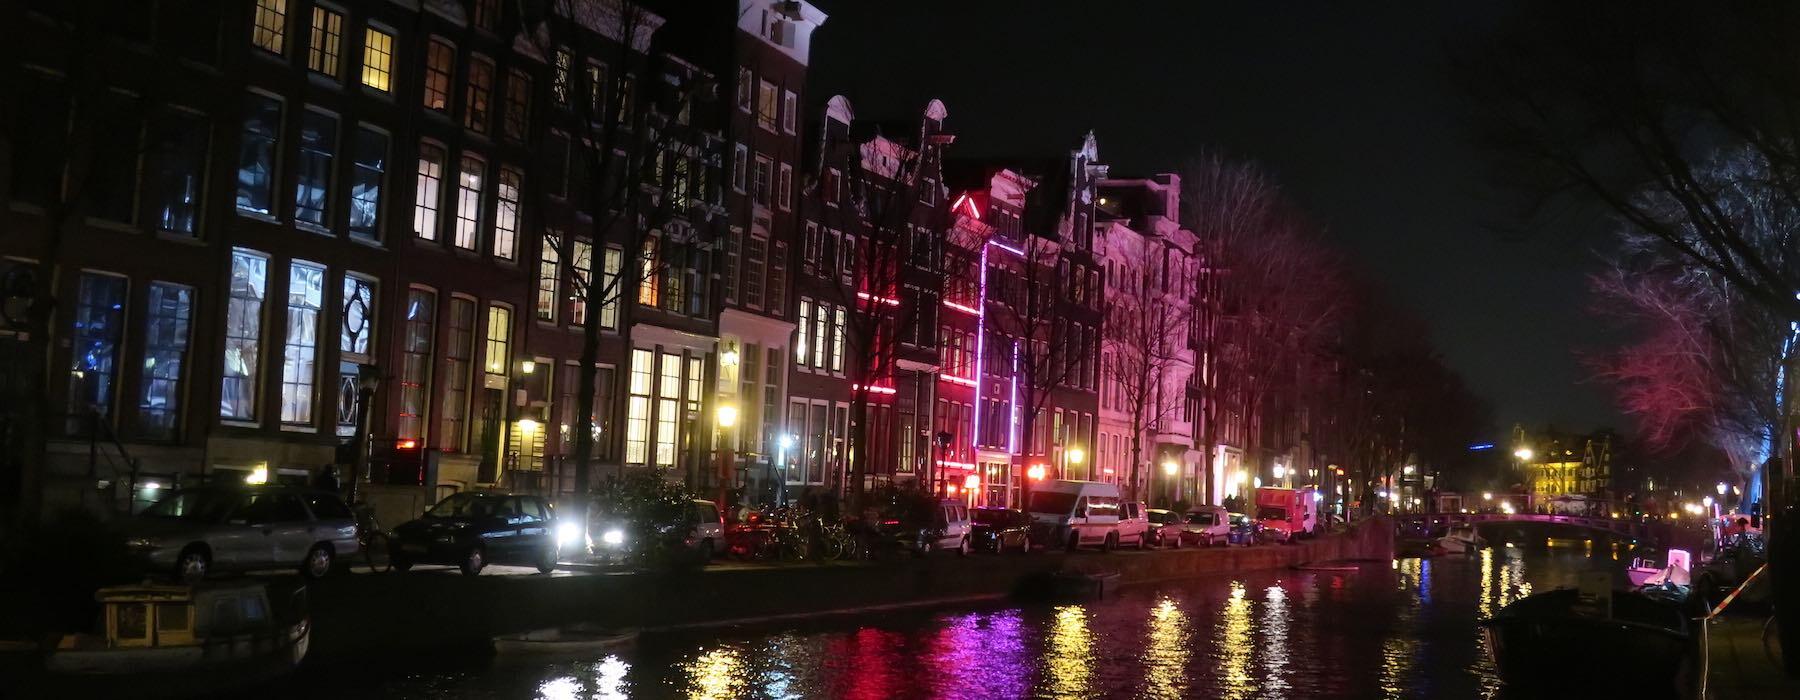 Best Amsterdam Red Light District pictures